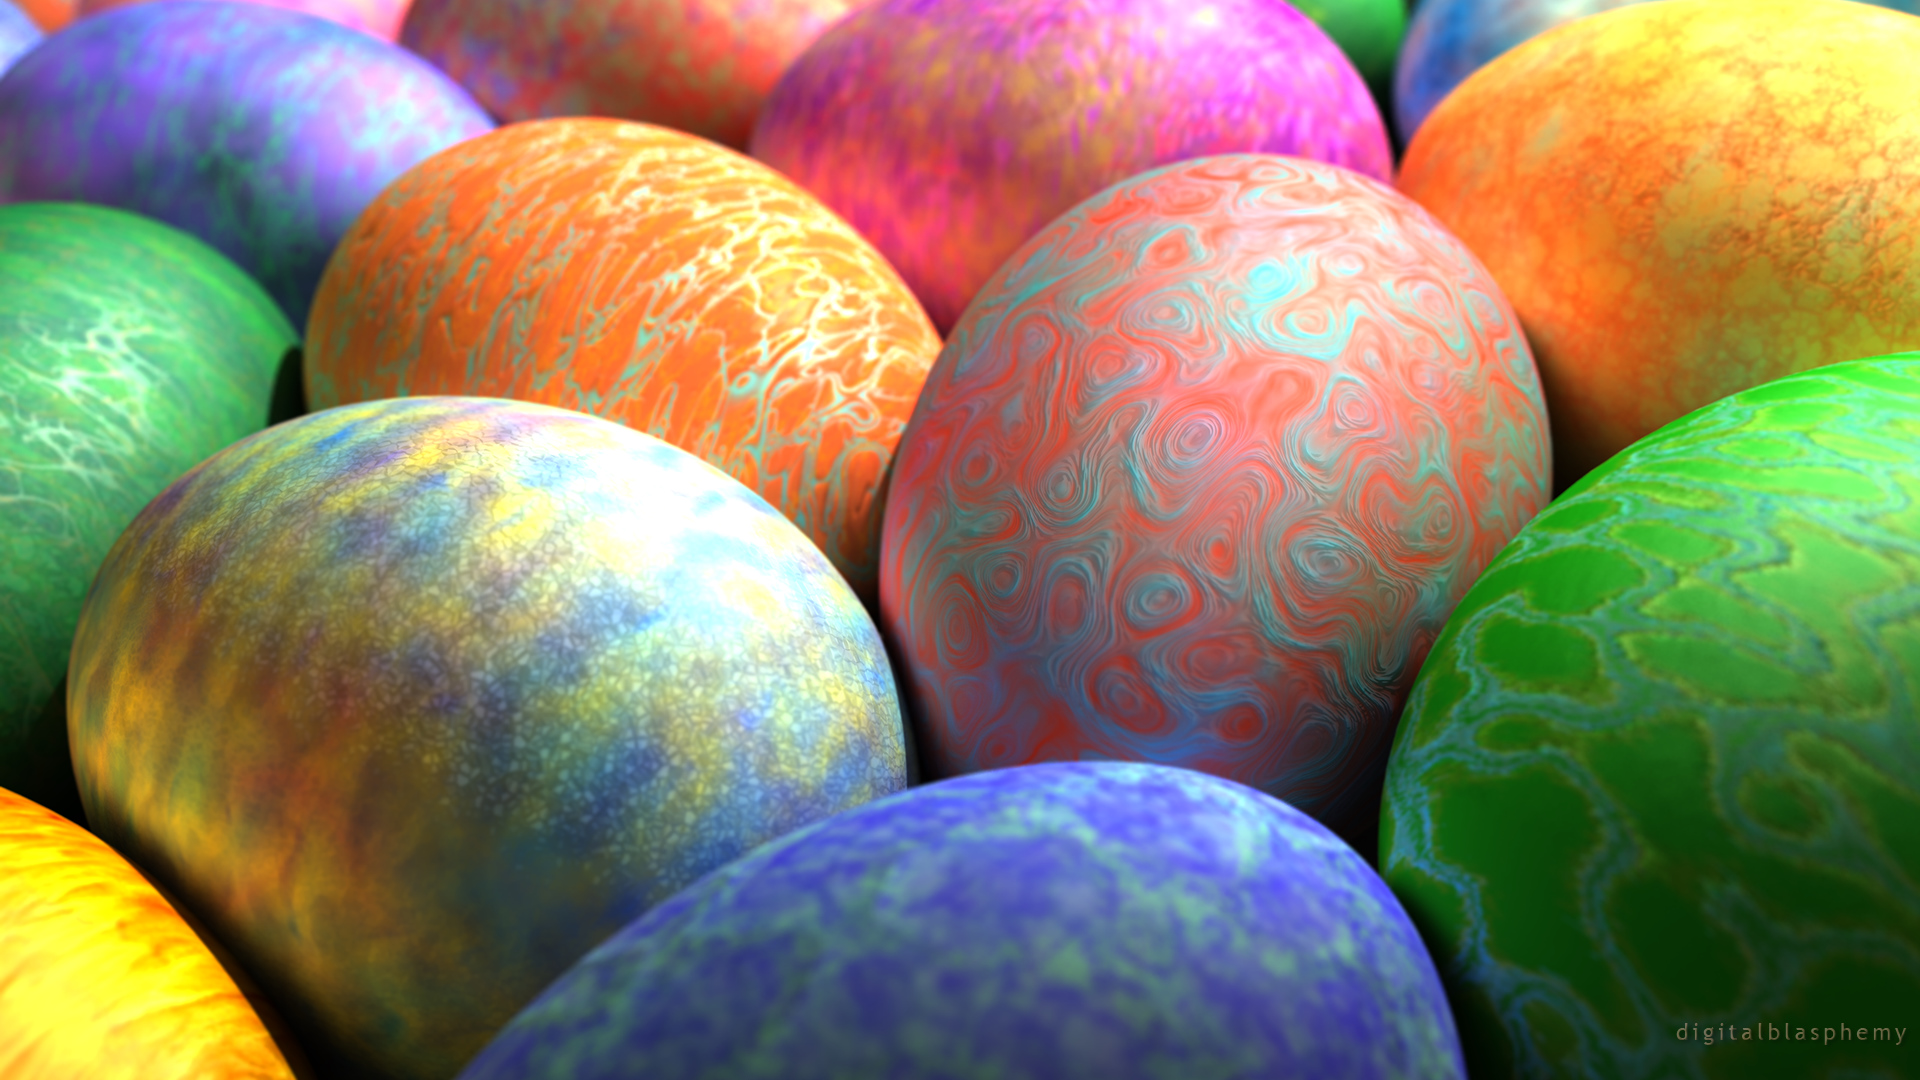 fond wallpaper,easter egg,easter,colorfulness,food,local food